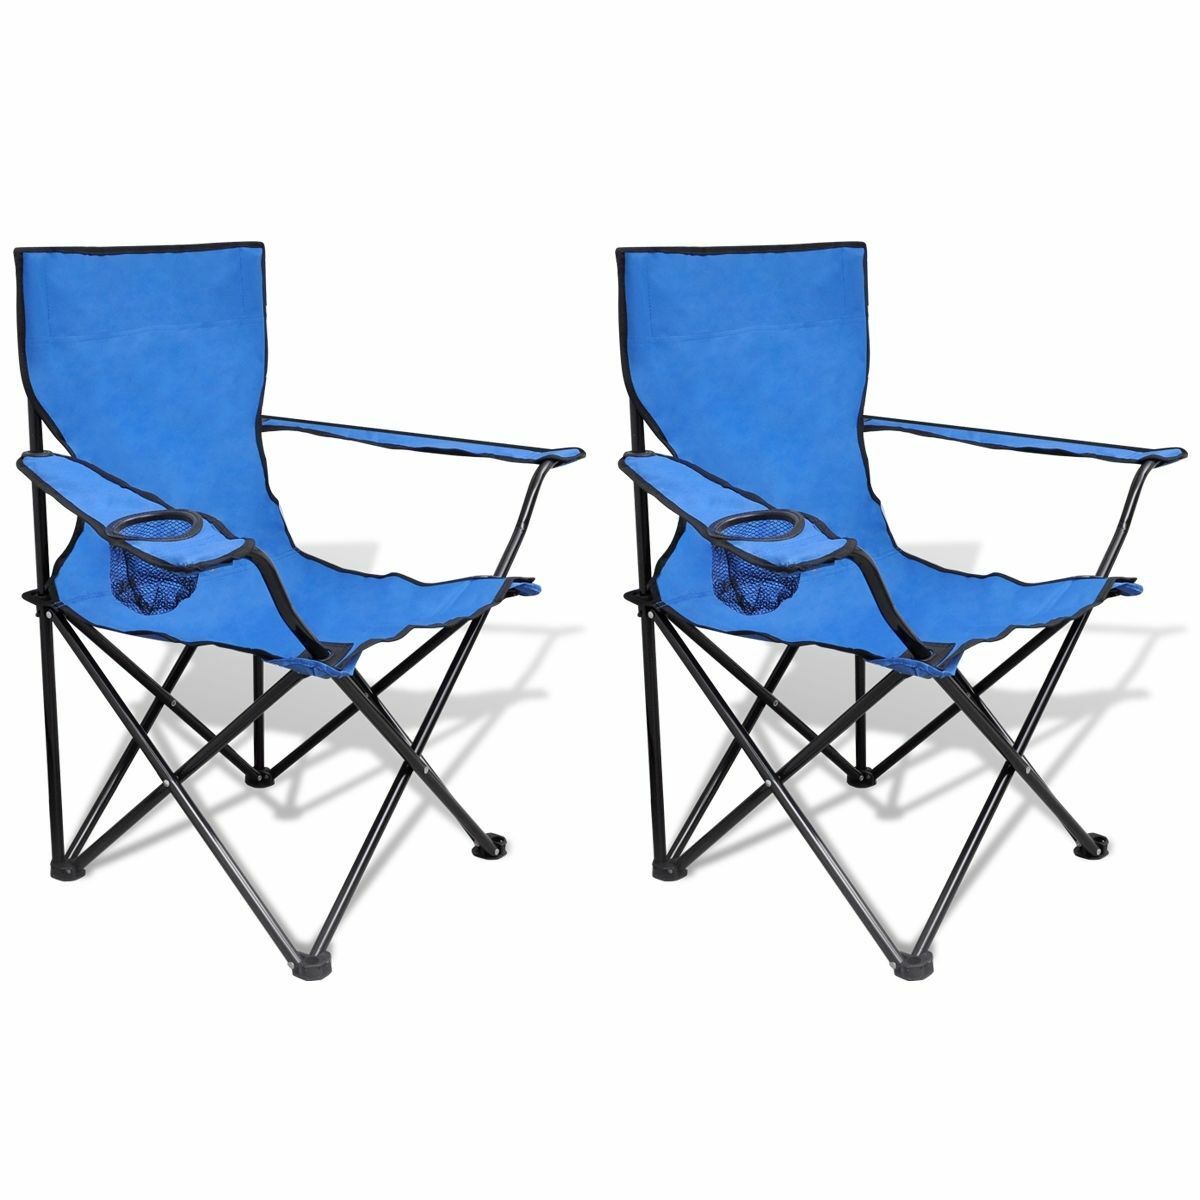 CAPTAINS CHAIRS LIGHTWEIGHT FOLDING SEATS CAMPING FISHING BEACH 